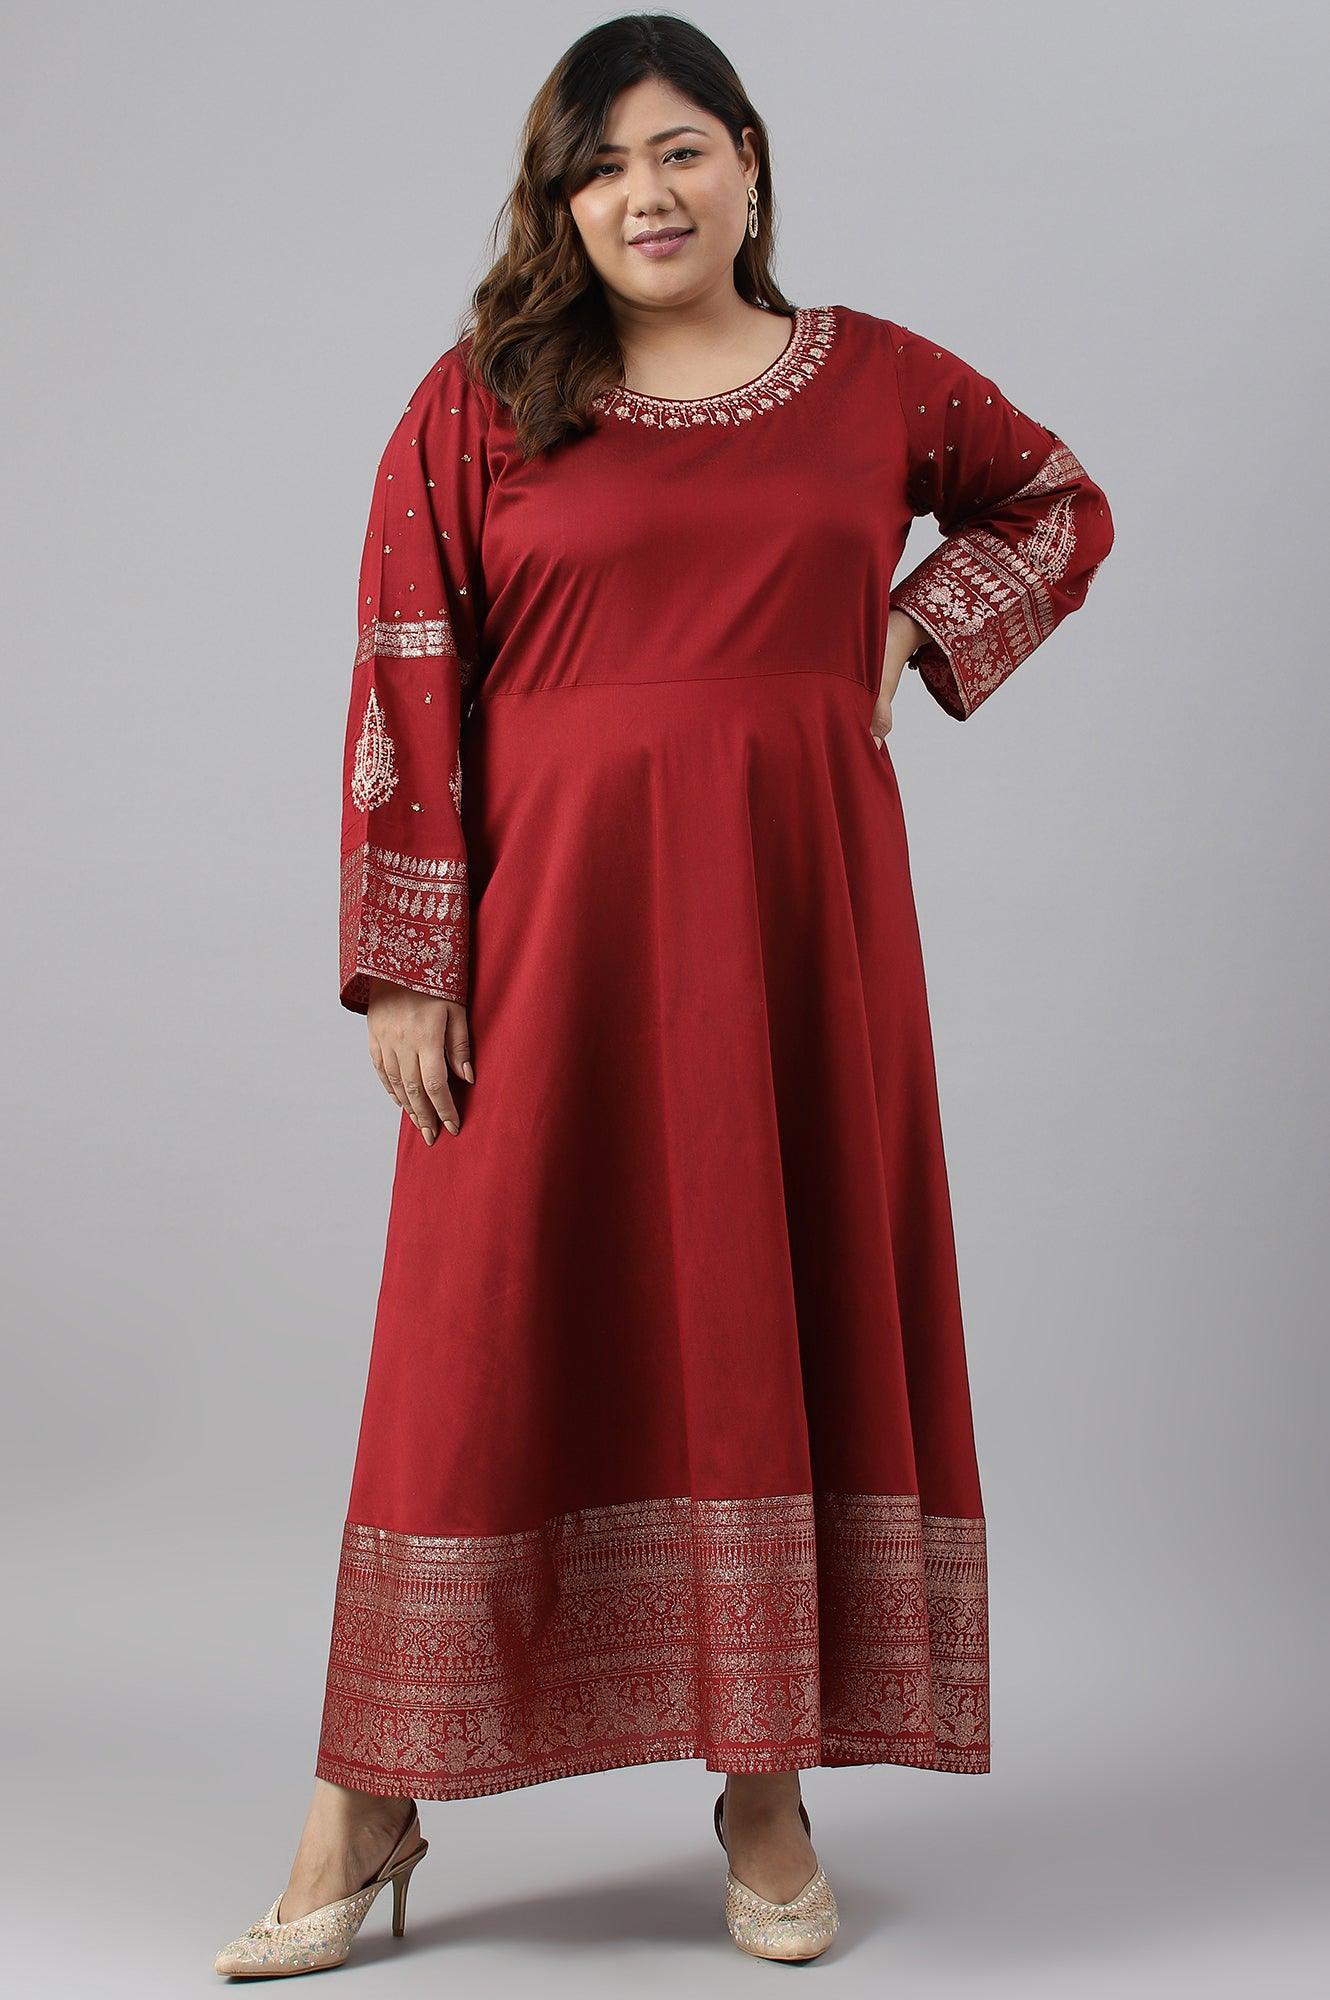 Maroon Festive Plus Size Gown With Embroidery On Neck And Sleeves - wforwoman